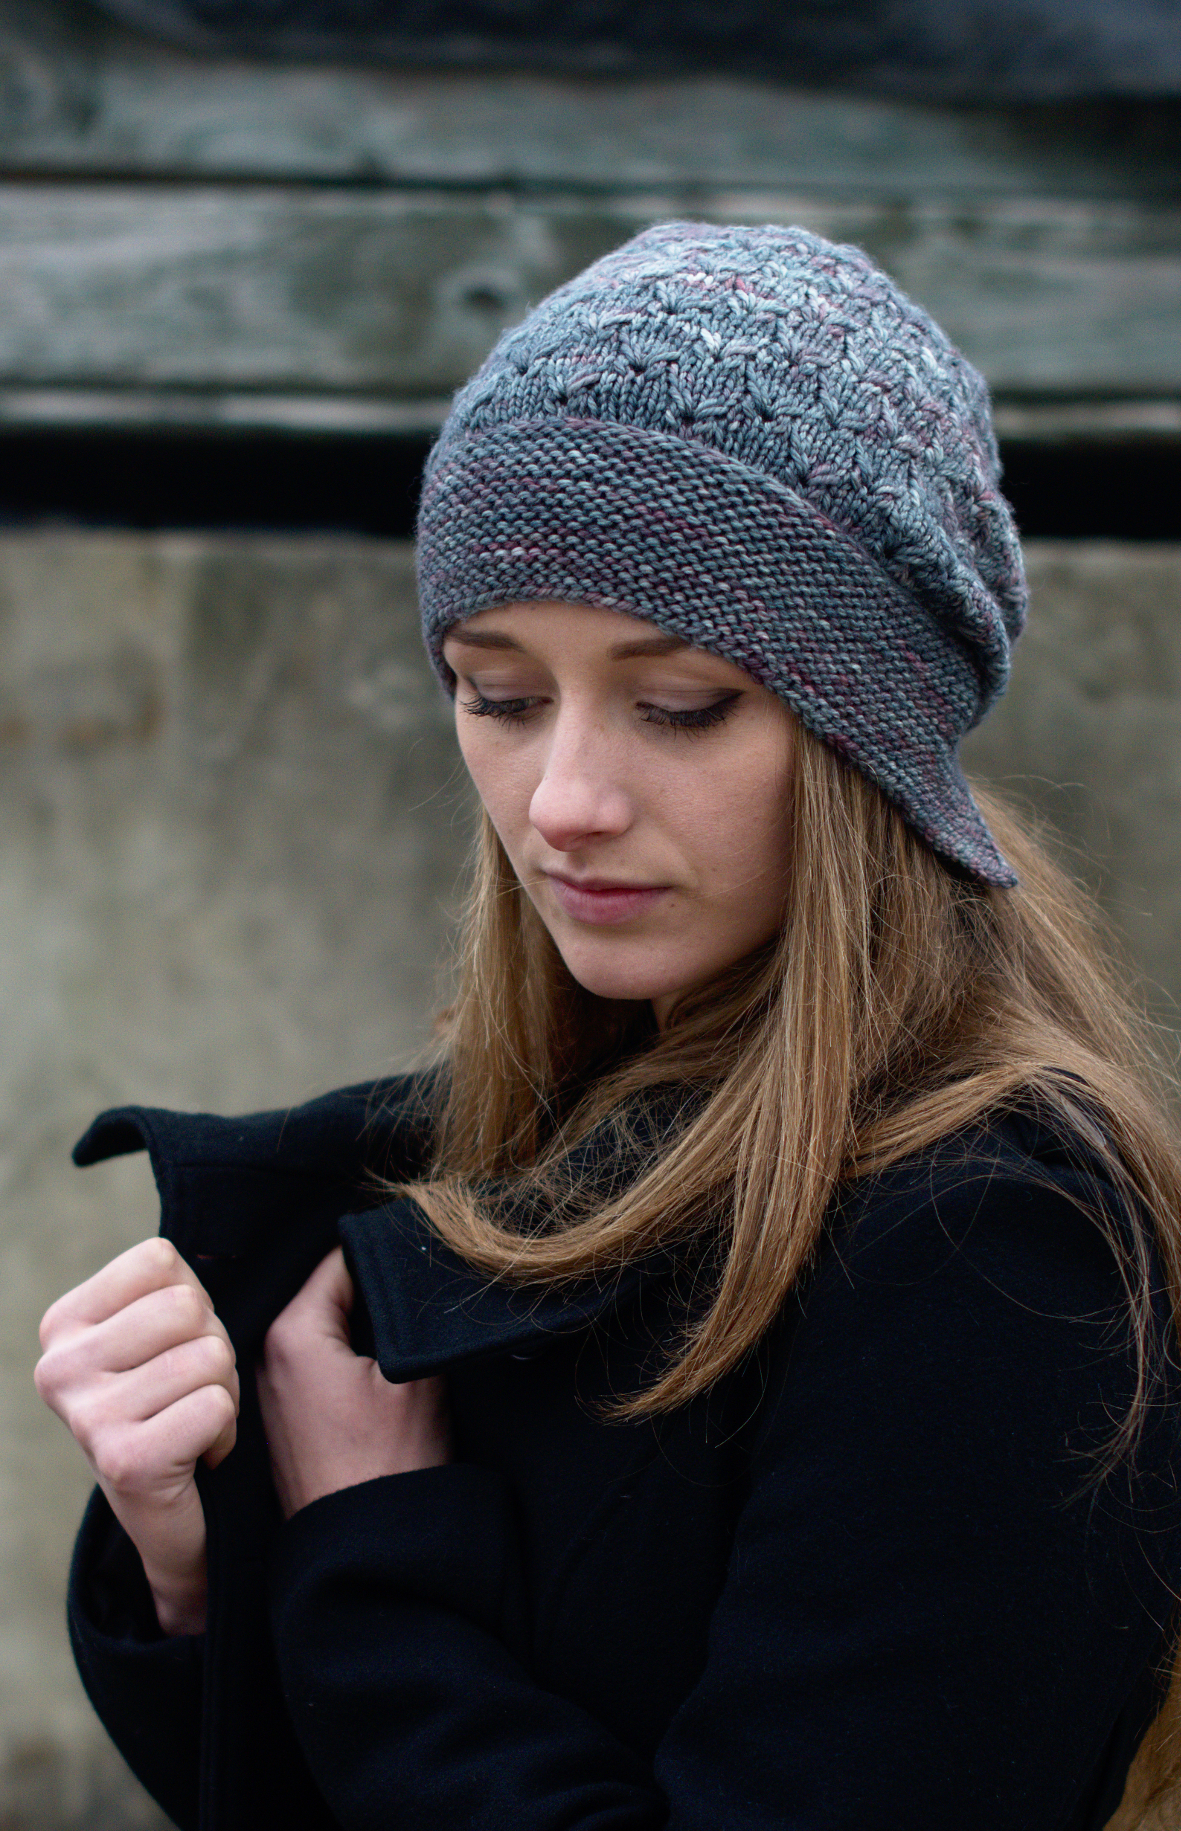 Lifted slouchy bonnet hat hand knitting pattern for worsted weight yarn